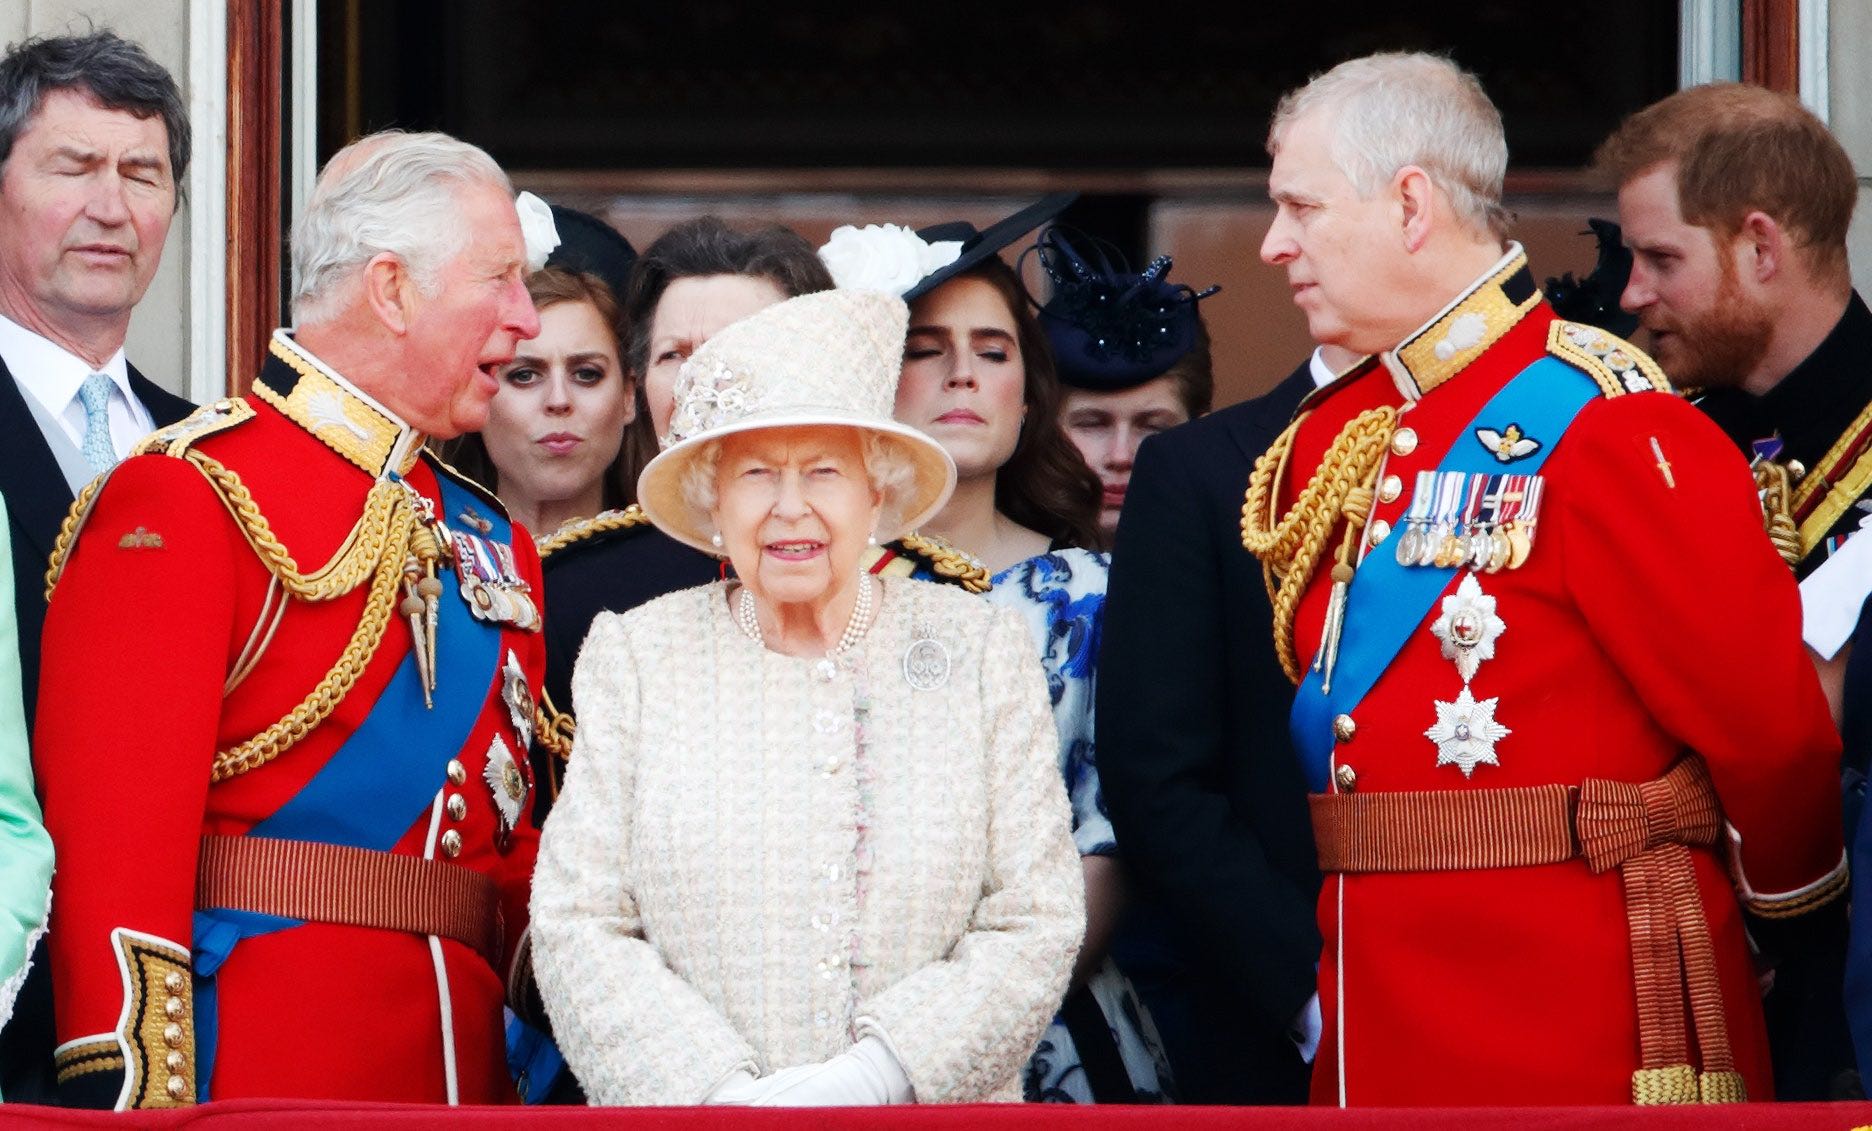 As more news comes out about Prince Andrew and Jeffrey Epstein's relationship, how is the Royal Family being affected by it?